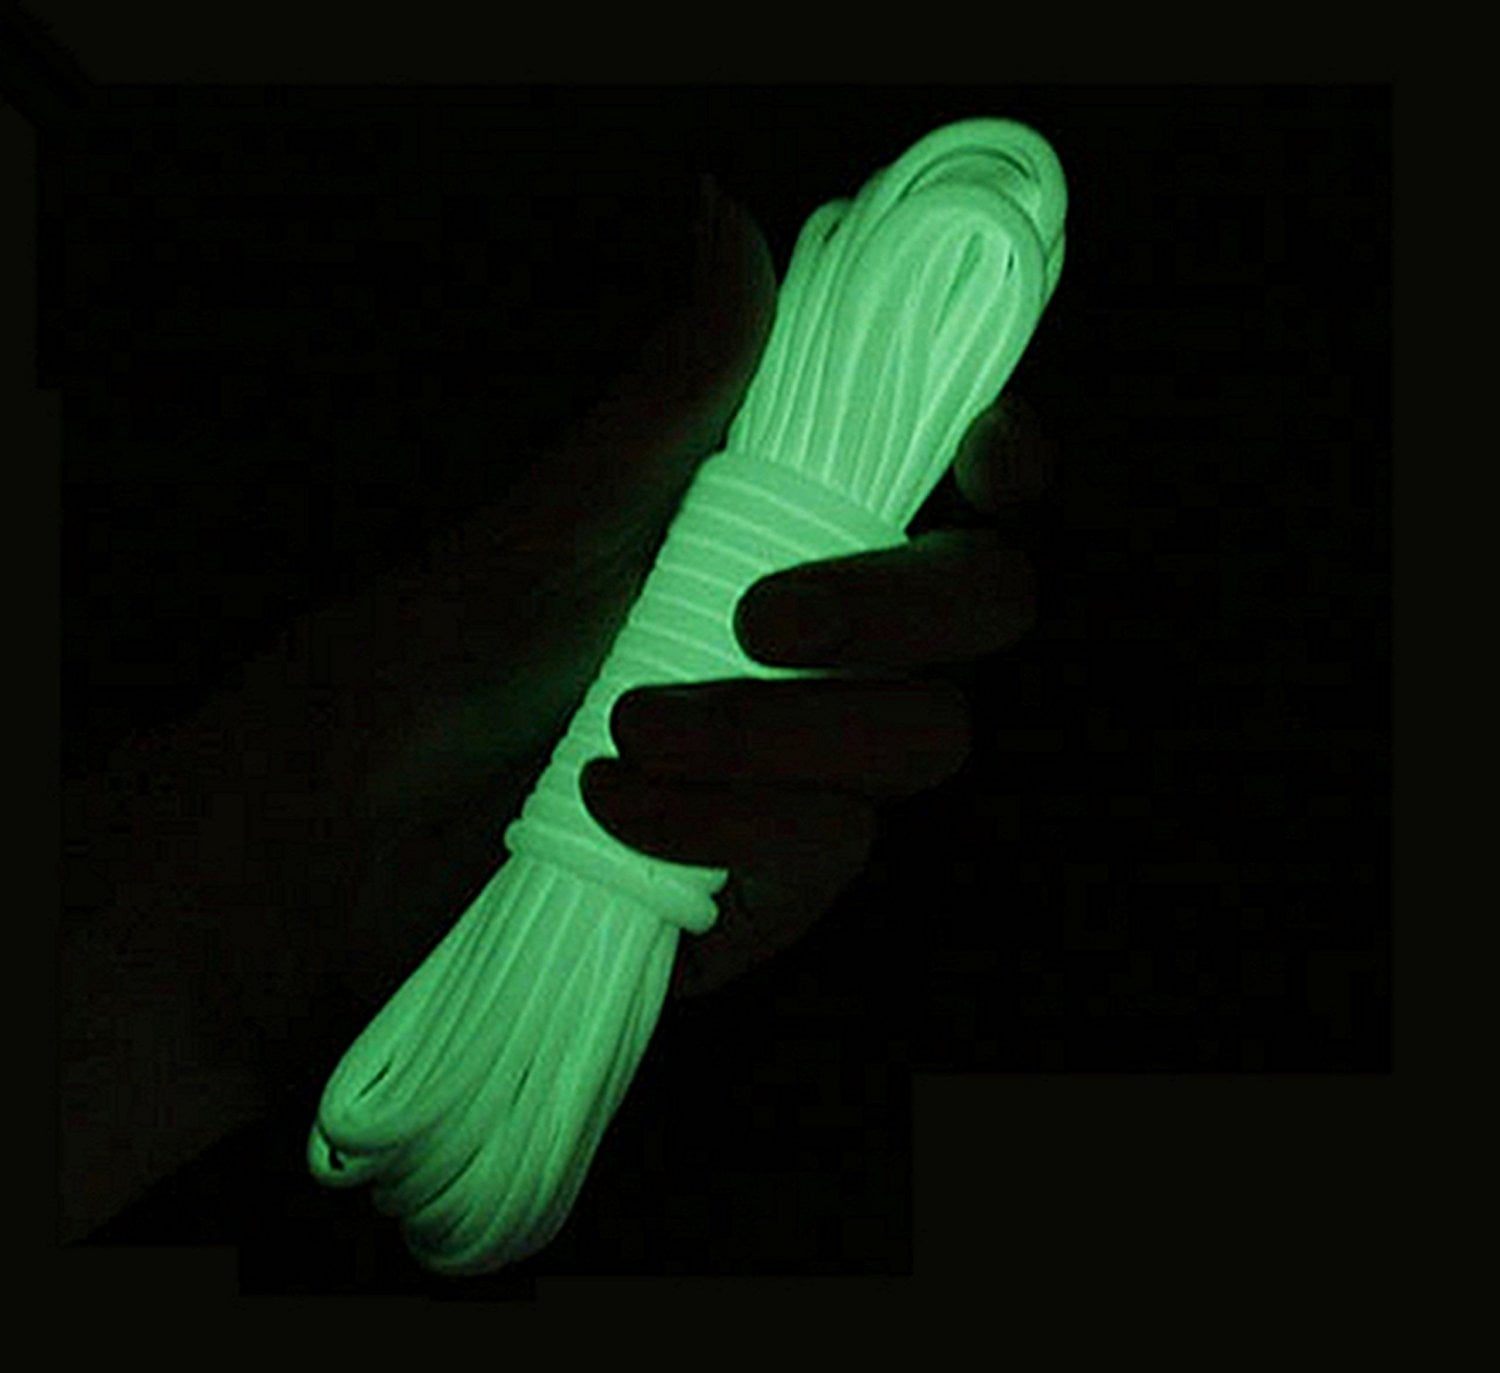 Topsale-ycld 9 Strand 550 Luminous Glow in the Dark Paracord Parachute Cord Tensile Strength Rope Outdoor Survival 100FT 100% Nylon 25ft 50ft 100ft 